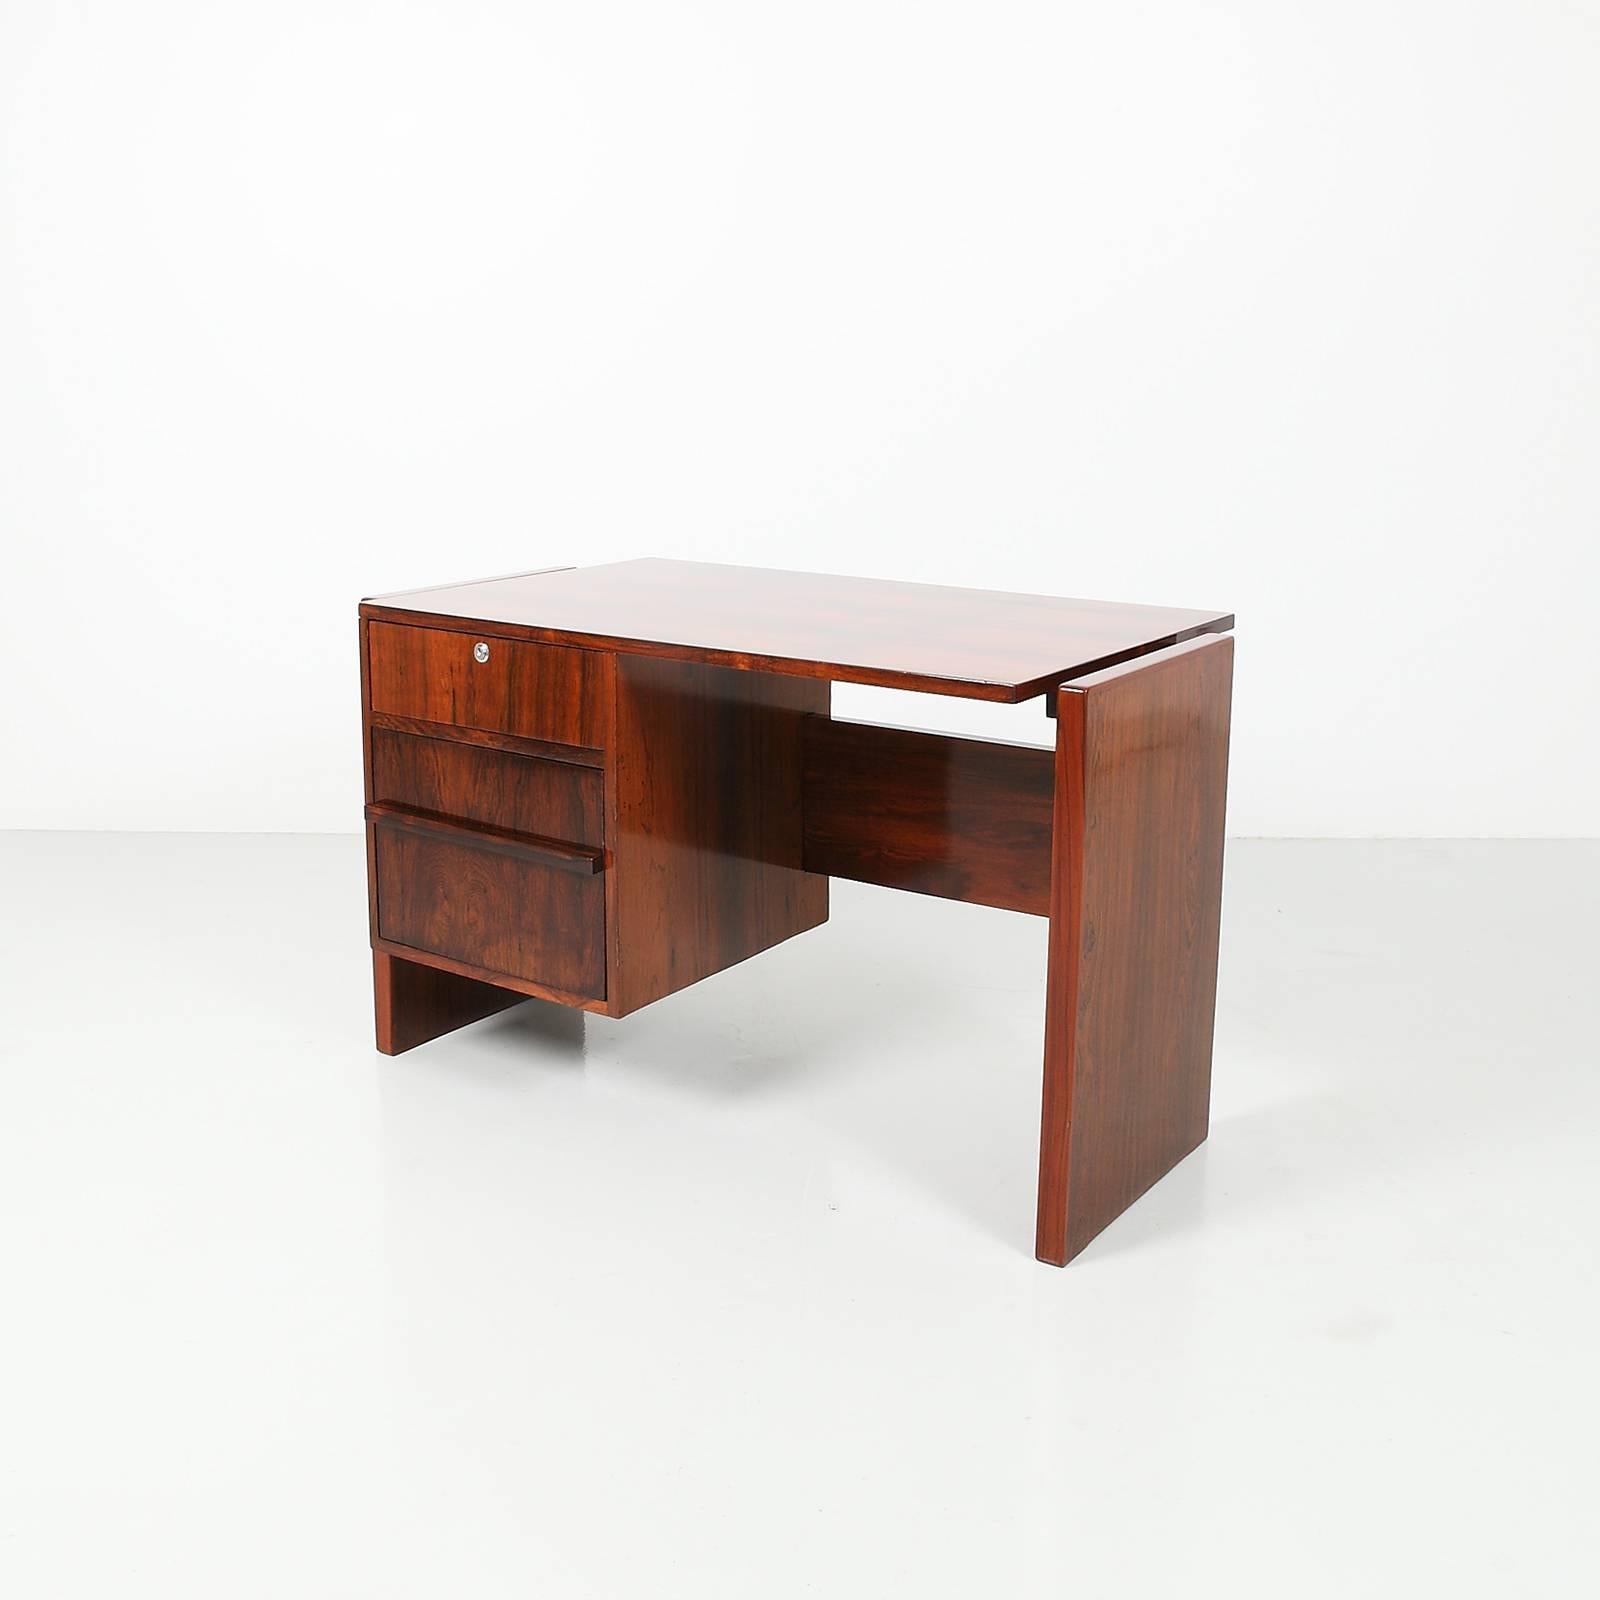 A rare example of a secretary desk designed by Joaquim Tenreiro for the offices of Bloch Editores in Rio de Janeiro, c. 1965.

Bloch Editores was the most important media group in 1960's Brazil. Tenreiro was commissioned to design many pieces for